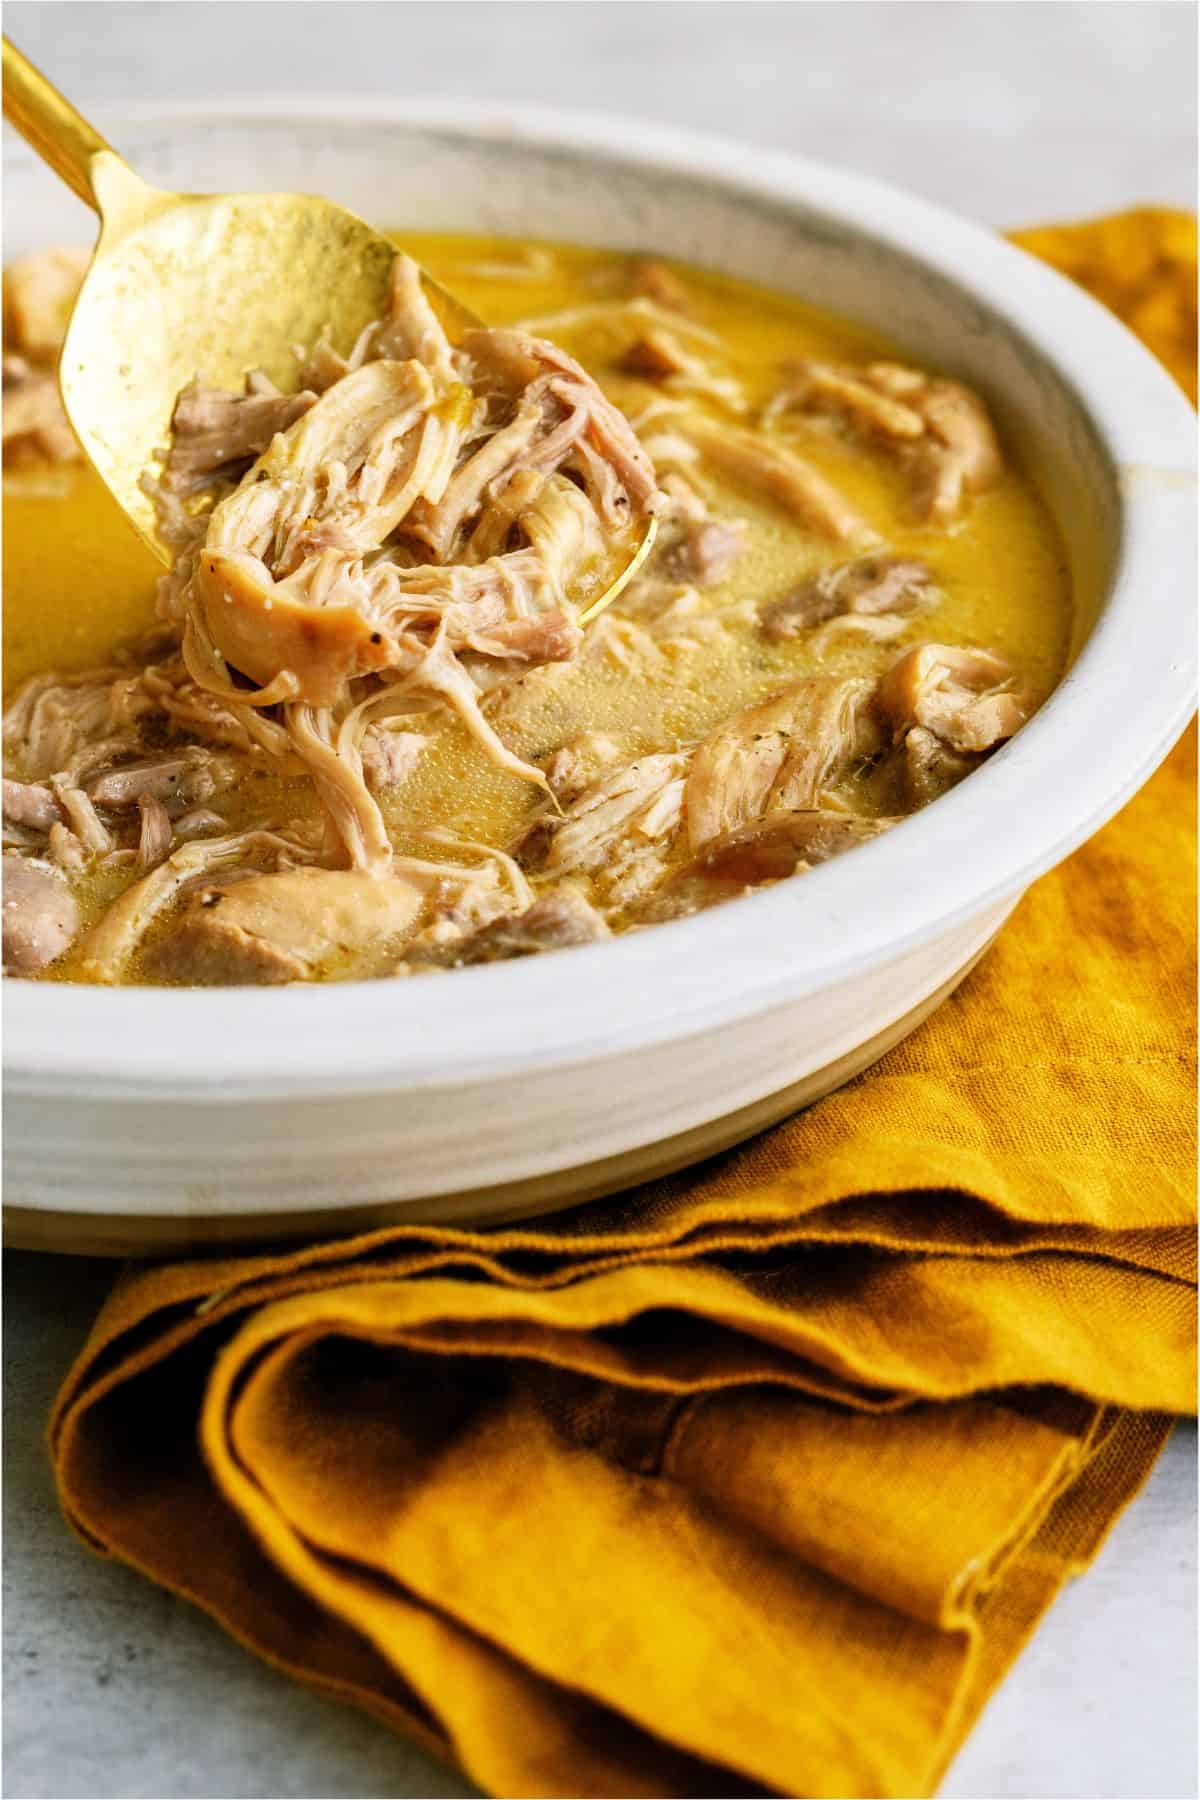 Shredded chicken in a bowl with sauce and a spoon lifting out shredded chicken